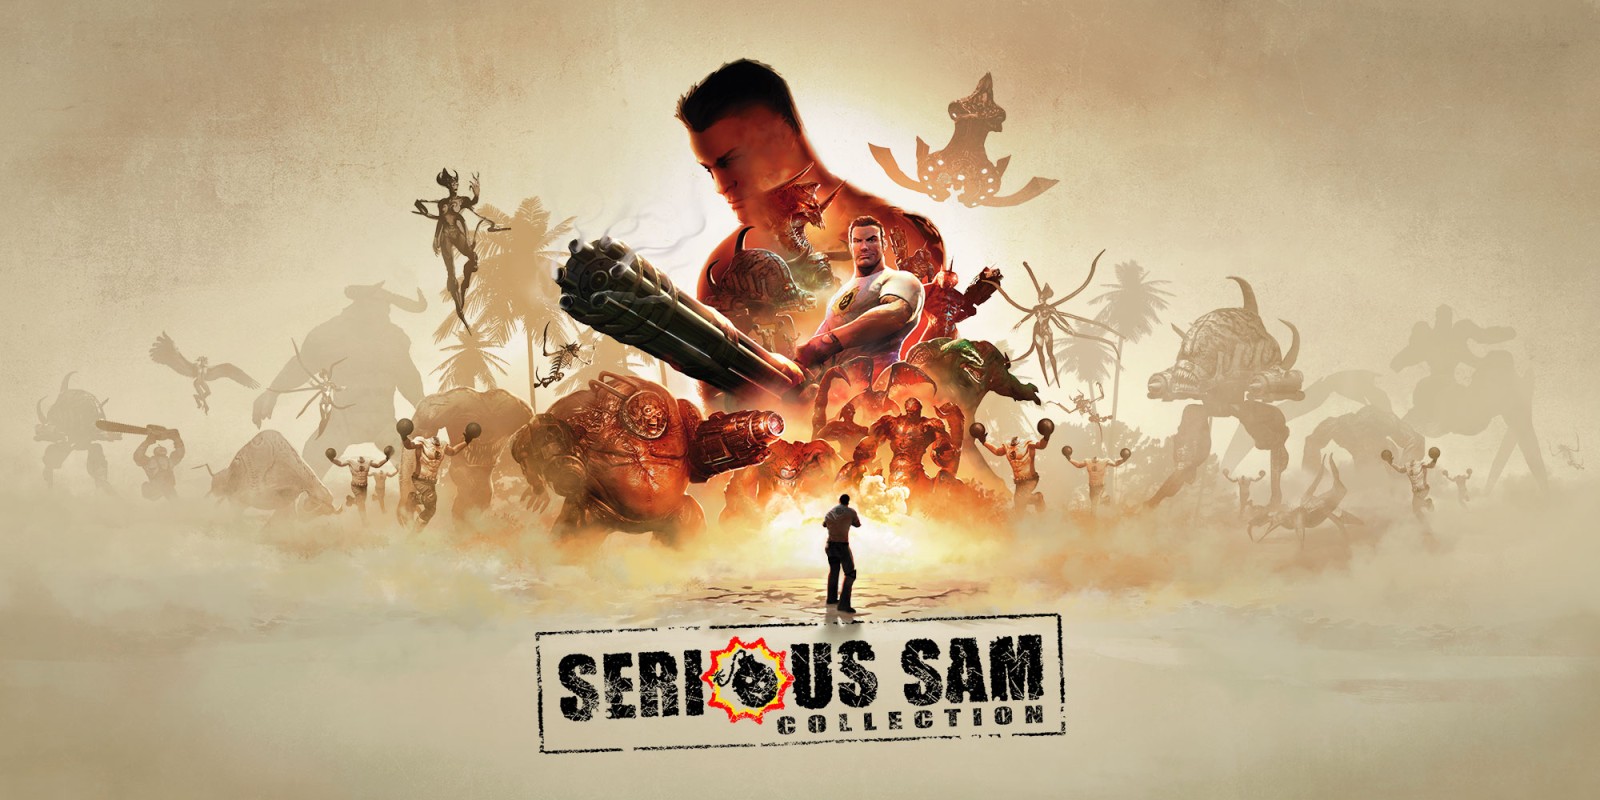 Serious Sam Collection | Nintendo Switch download software | Games | Nintendo